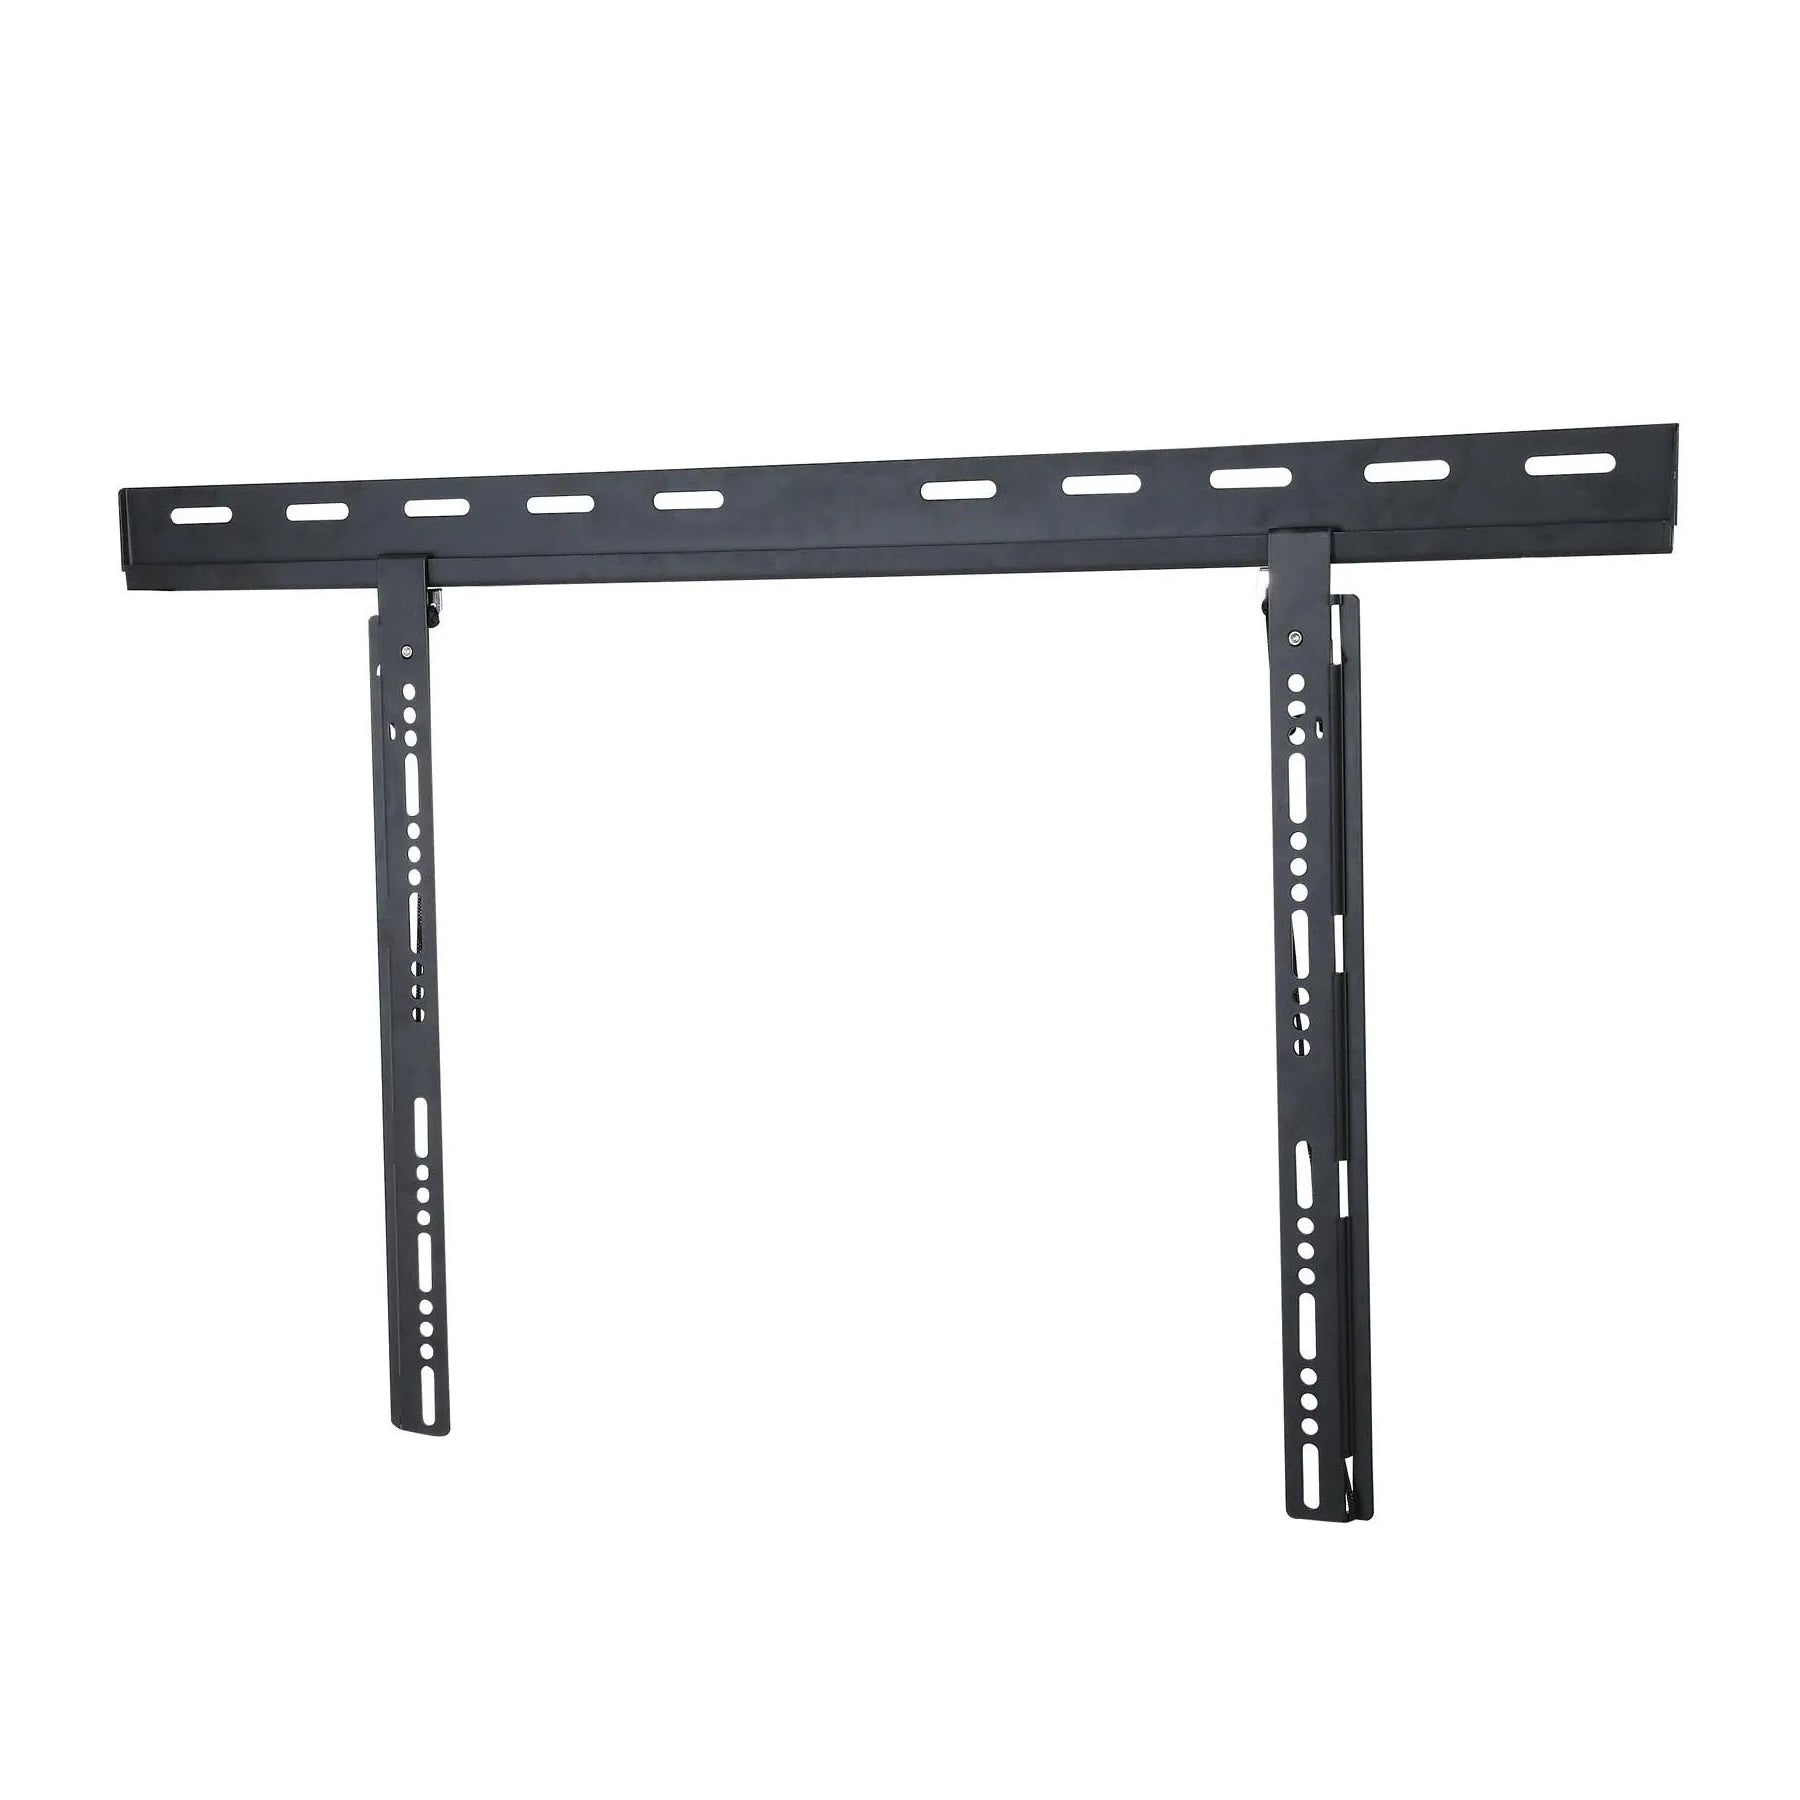 64-1125B Ultra Slim TV Wall Mount Bracket for 37-60 inches TVs